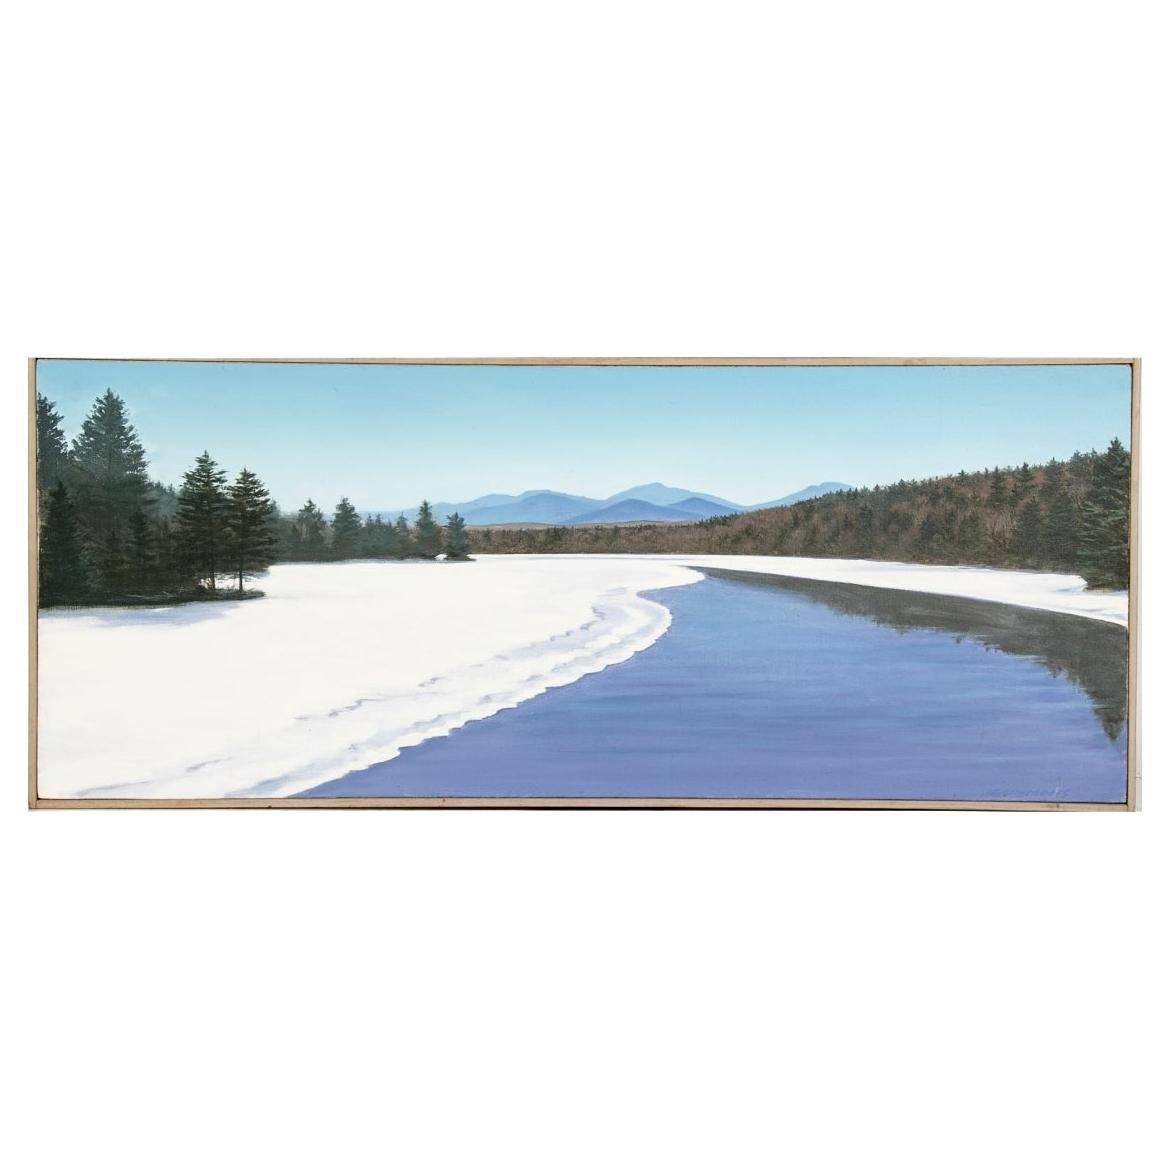 J.E. Simmons, Contemporary Oil on Canvas, "January Thaw" For Sale